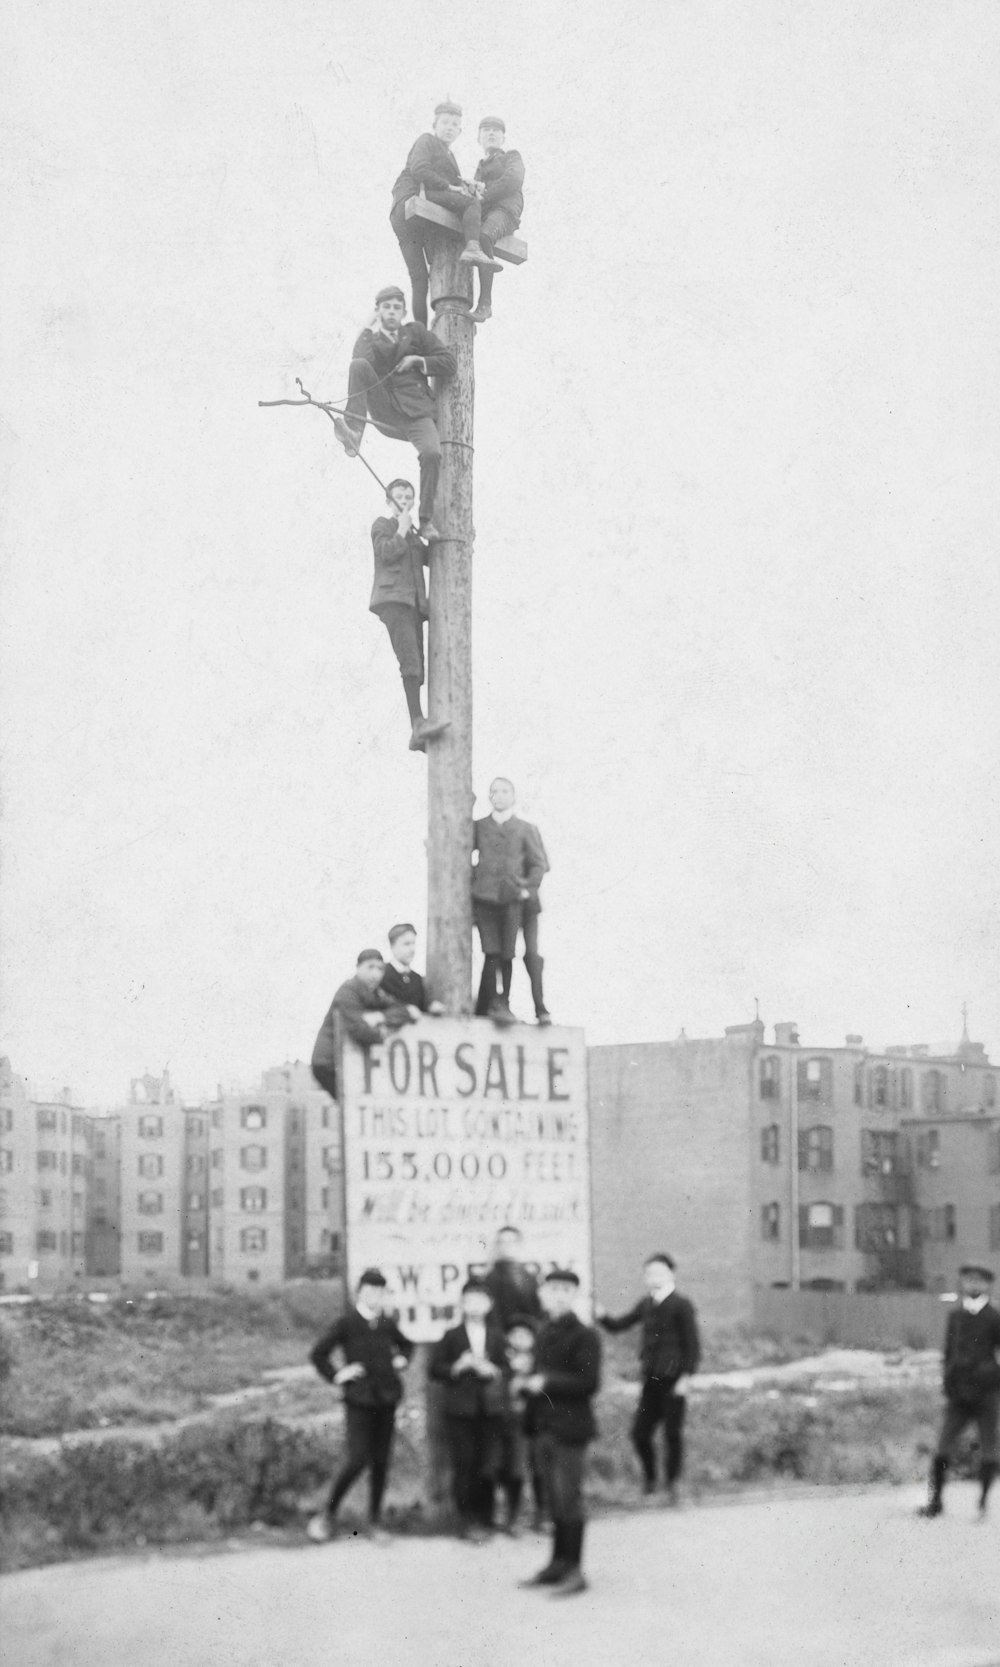 a group of men standing on top of a wooden pole